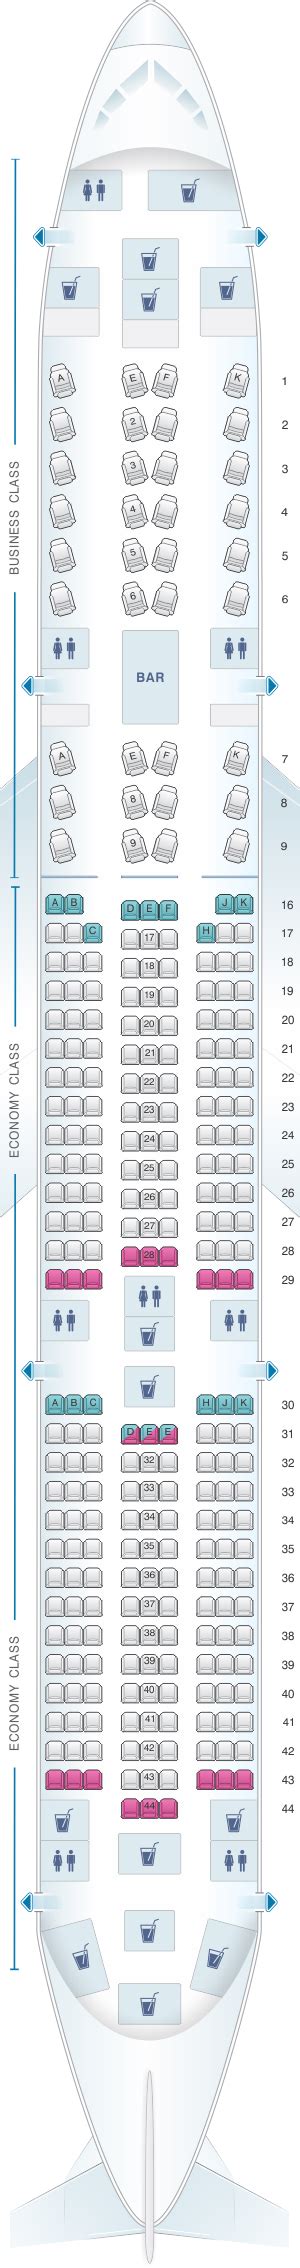 Airbus A350 Seating Chart Elcho Table